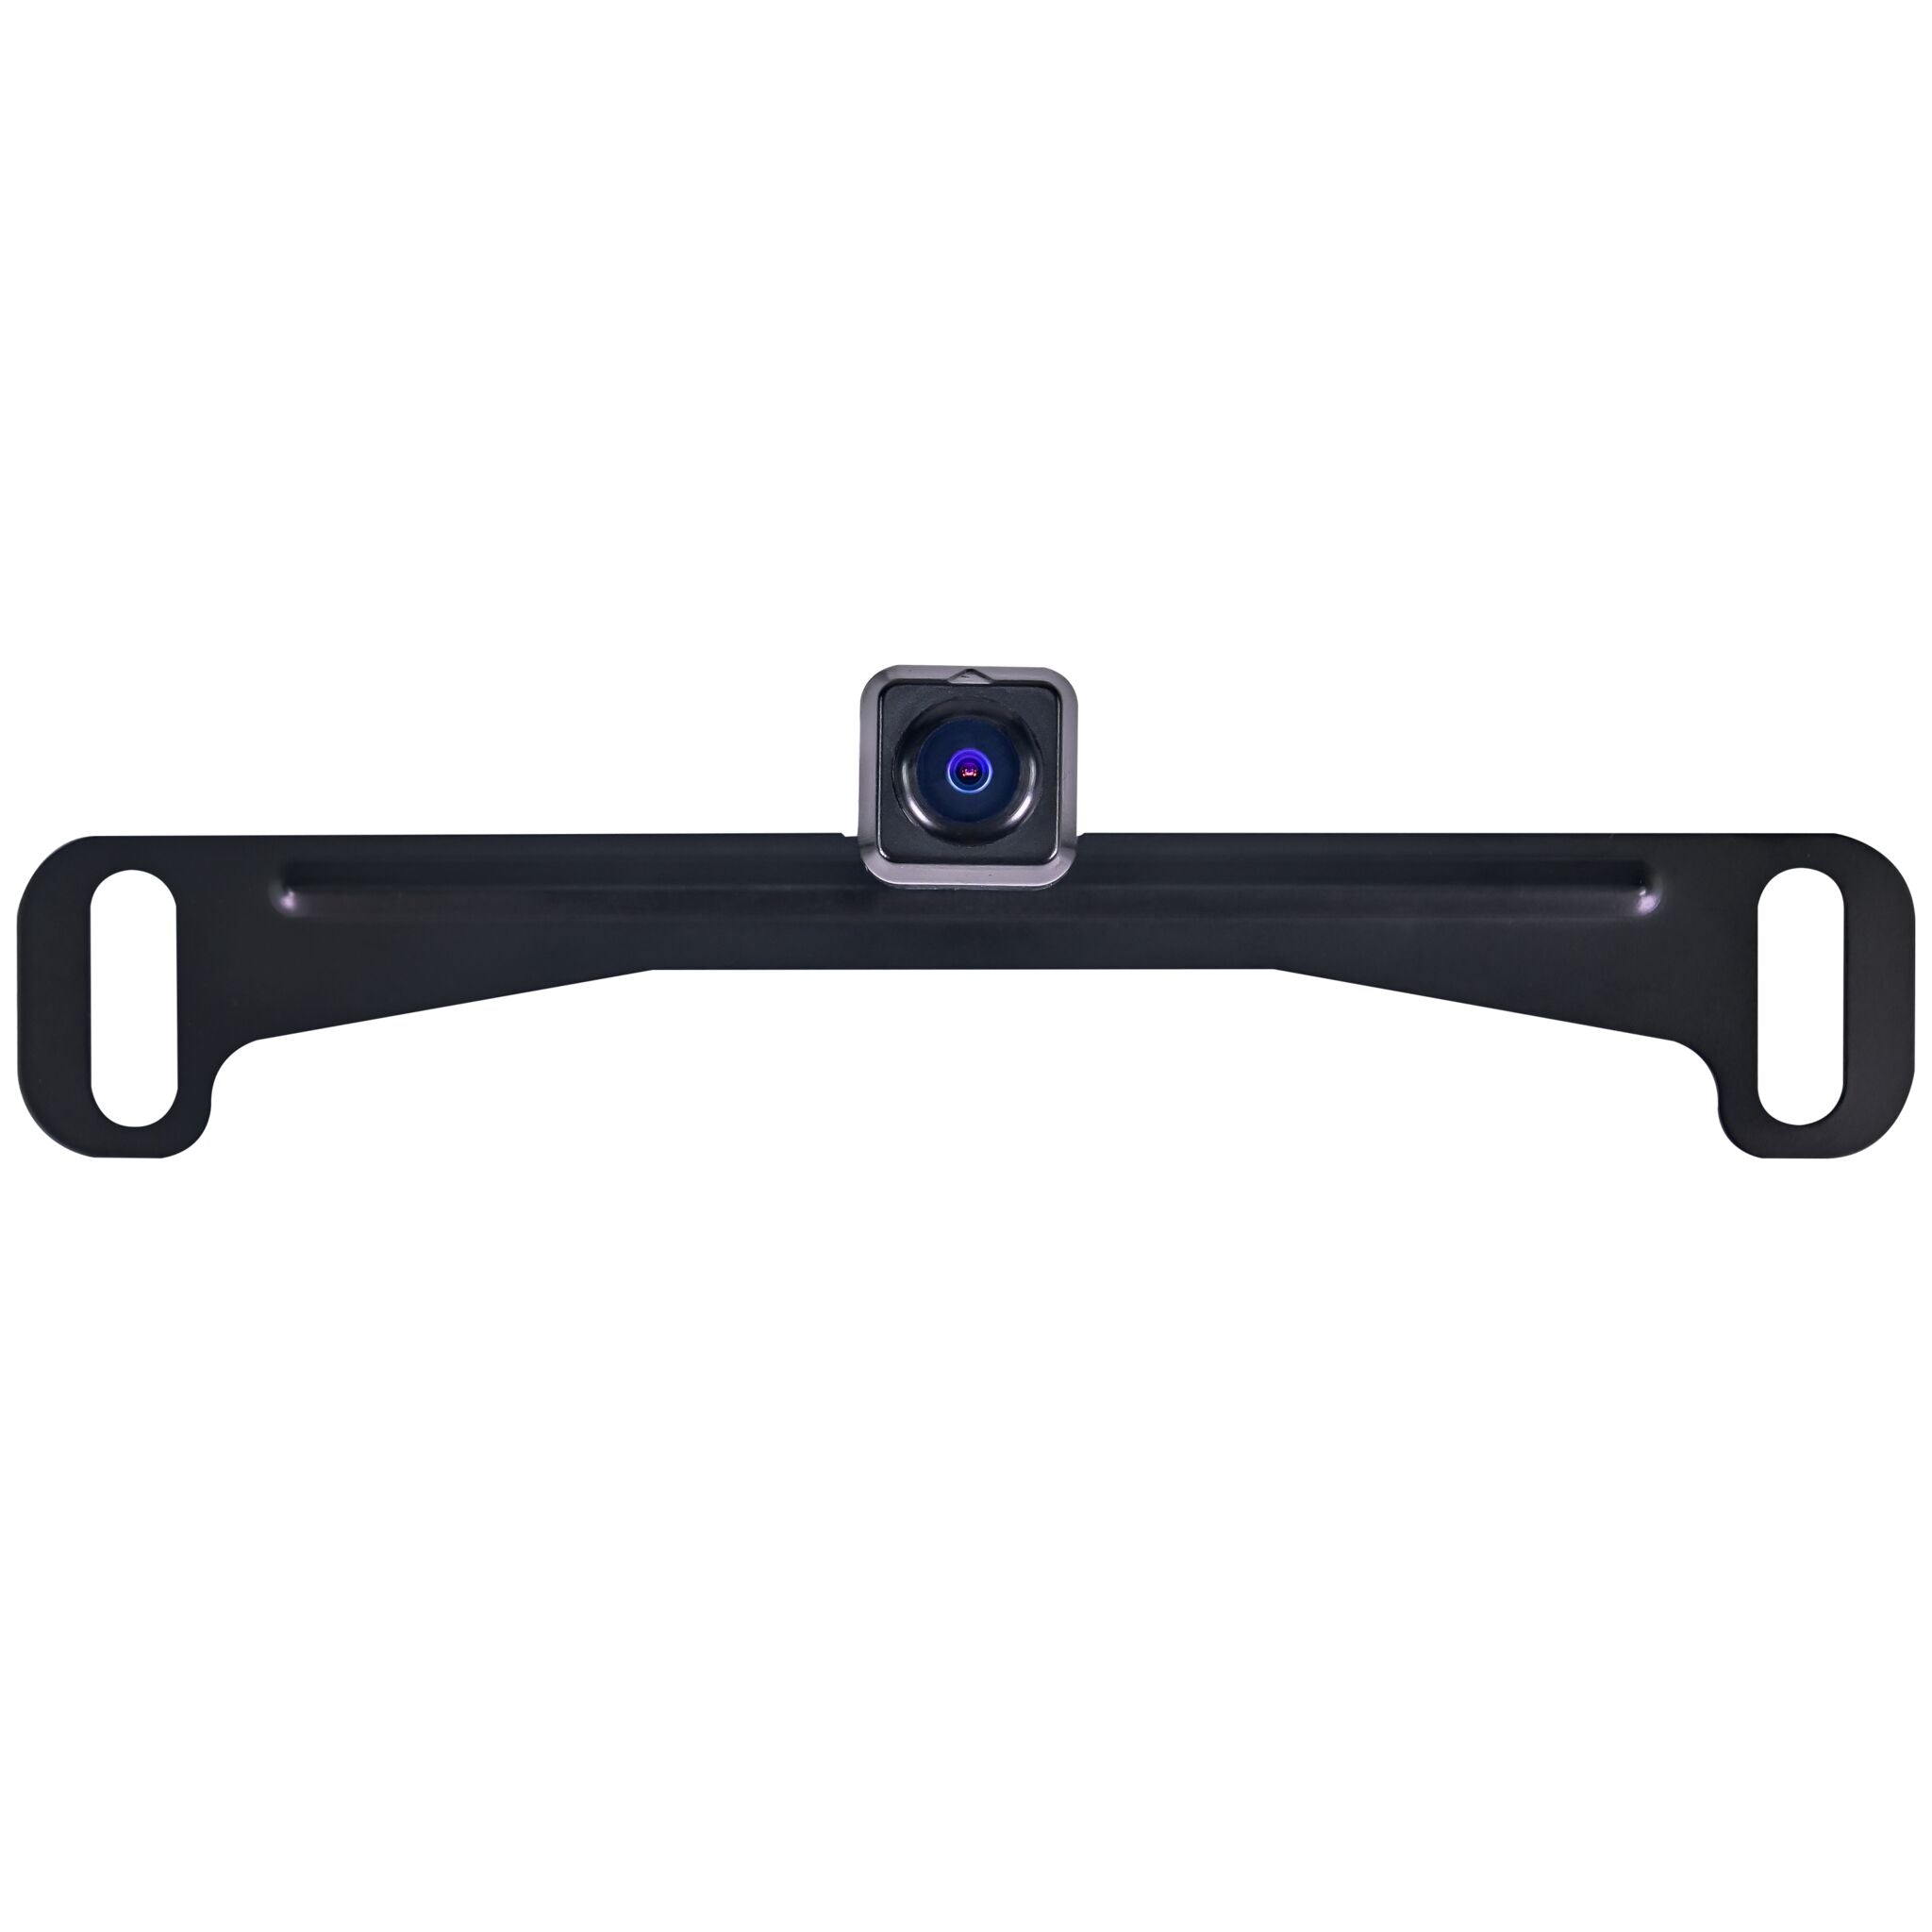 Universal License Plate Camera (Front or Rear View Mounting Options)